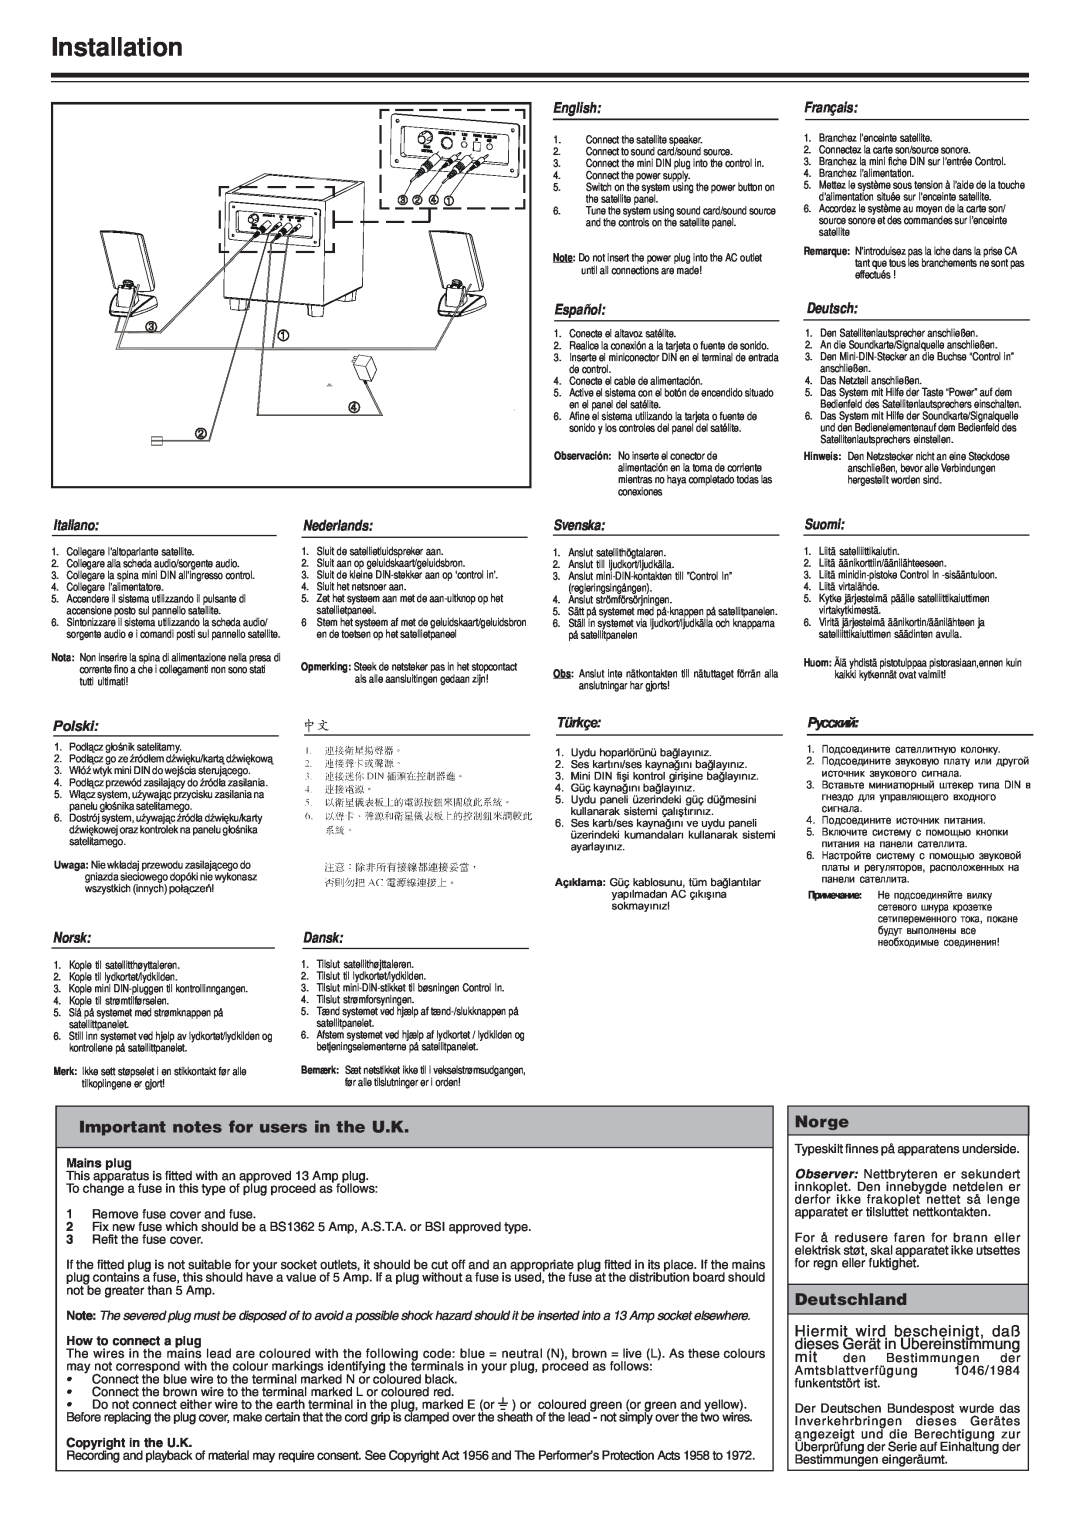 Philips A3.310, MMS 313 important safety instructions Installation, Important notes for users in the U.K, Norge, Deutschland 